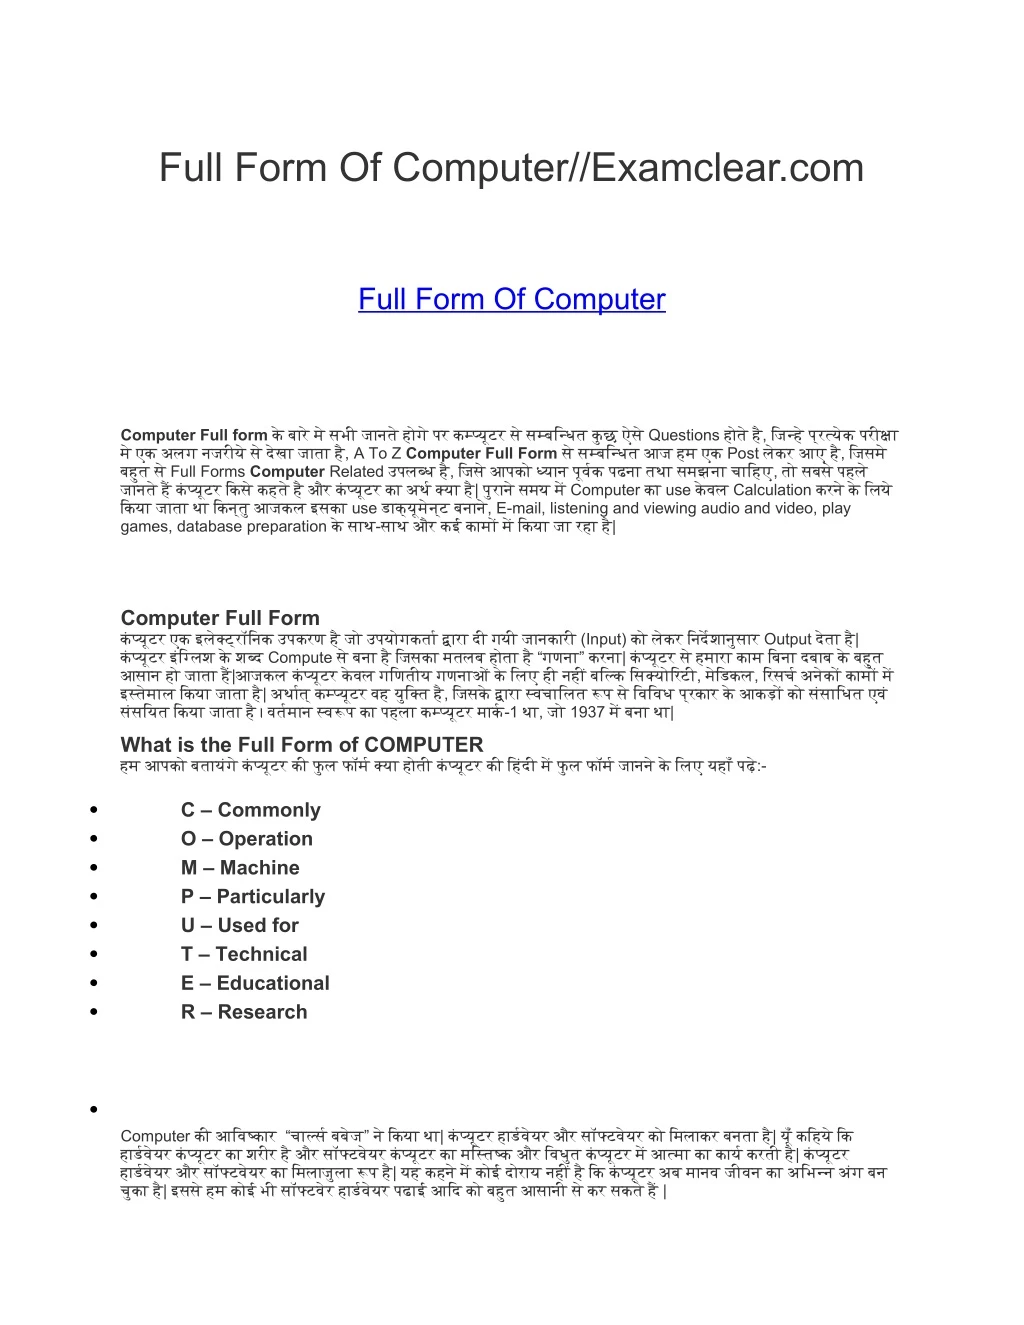 full form of computer examclear com